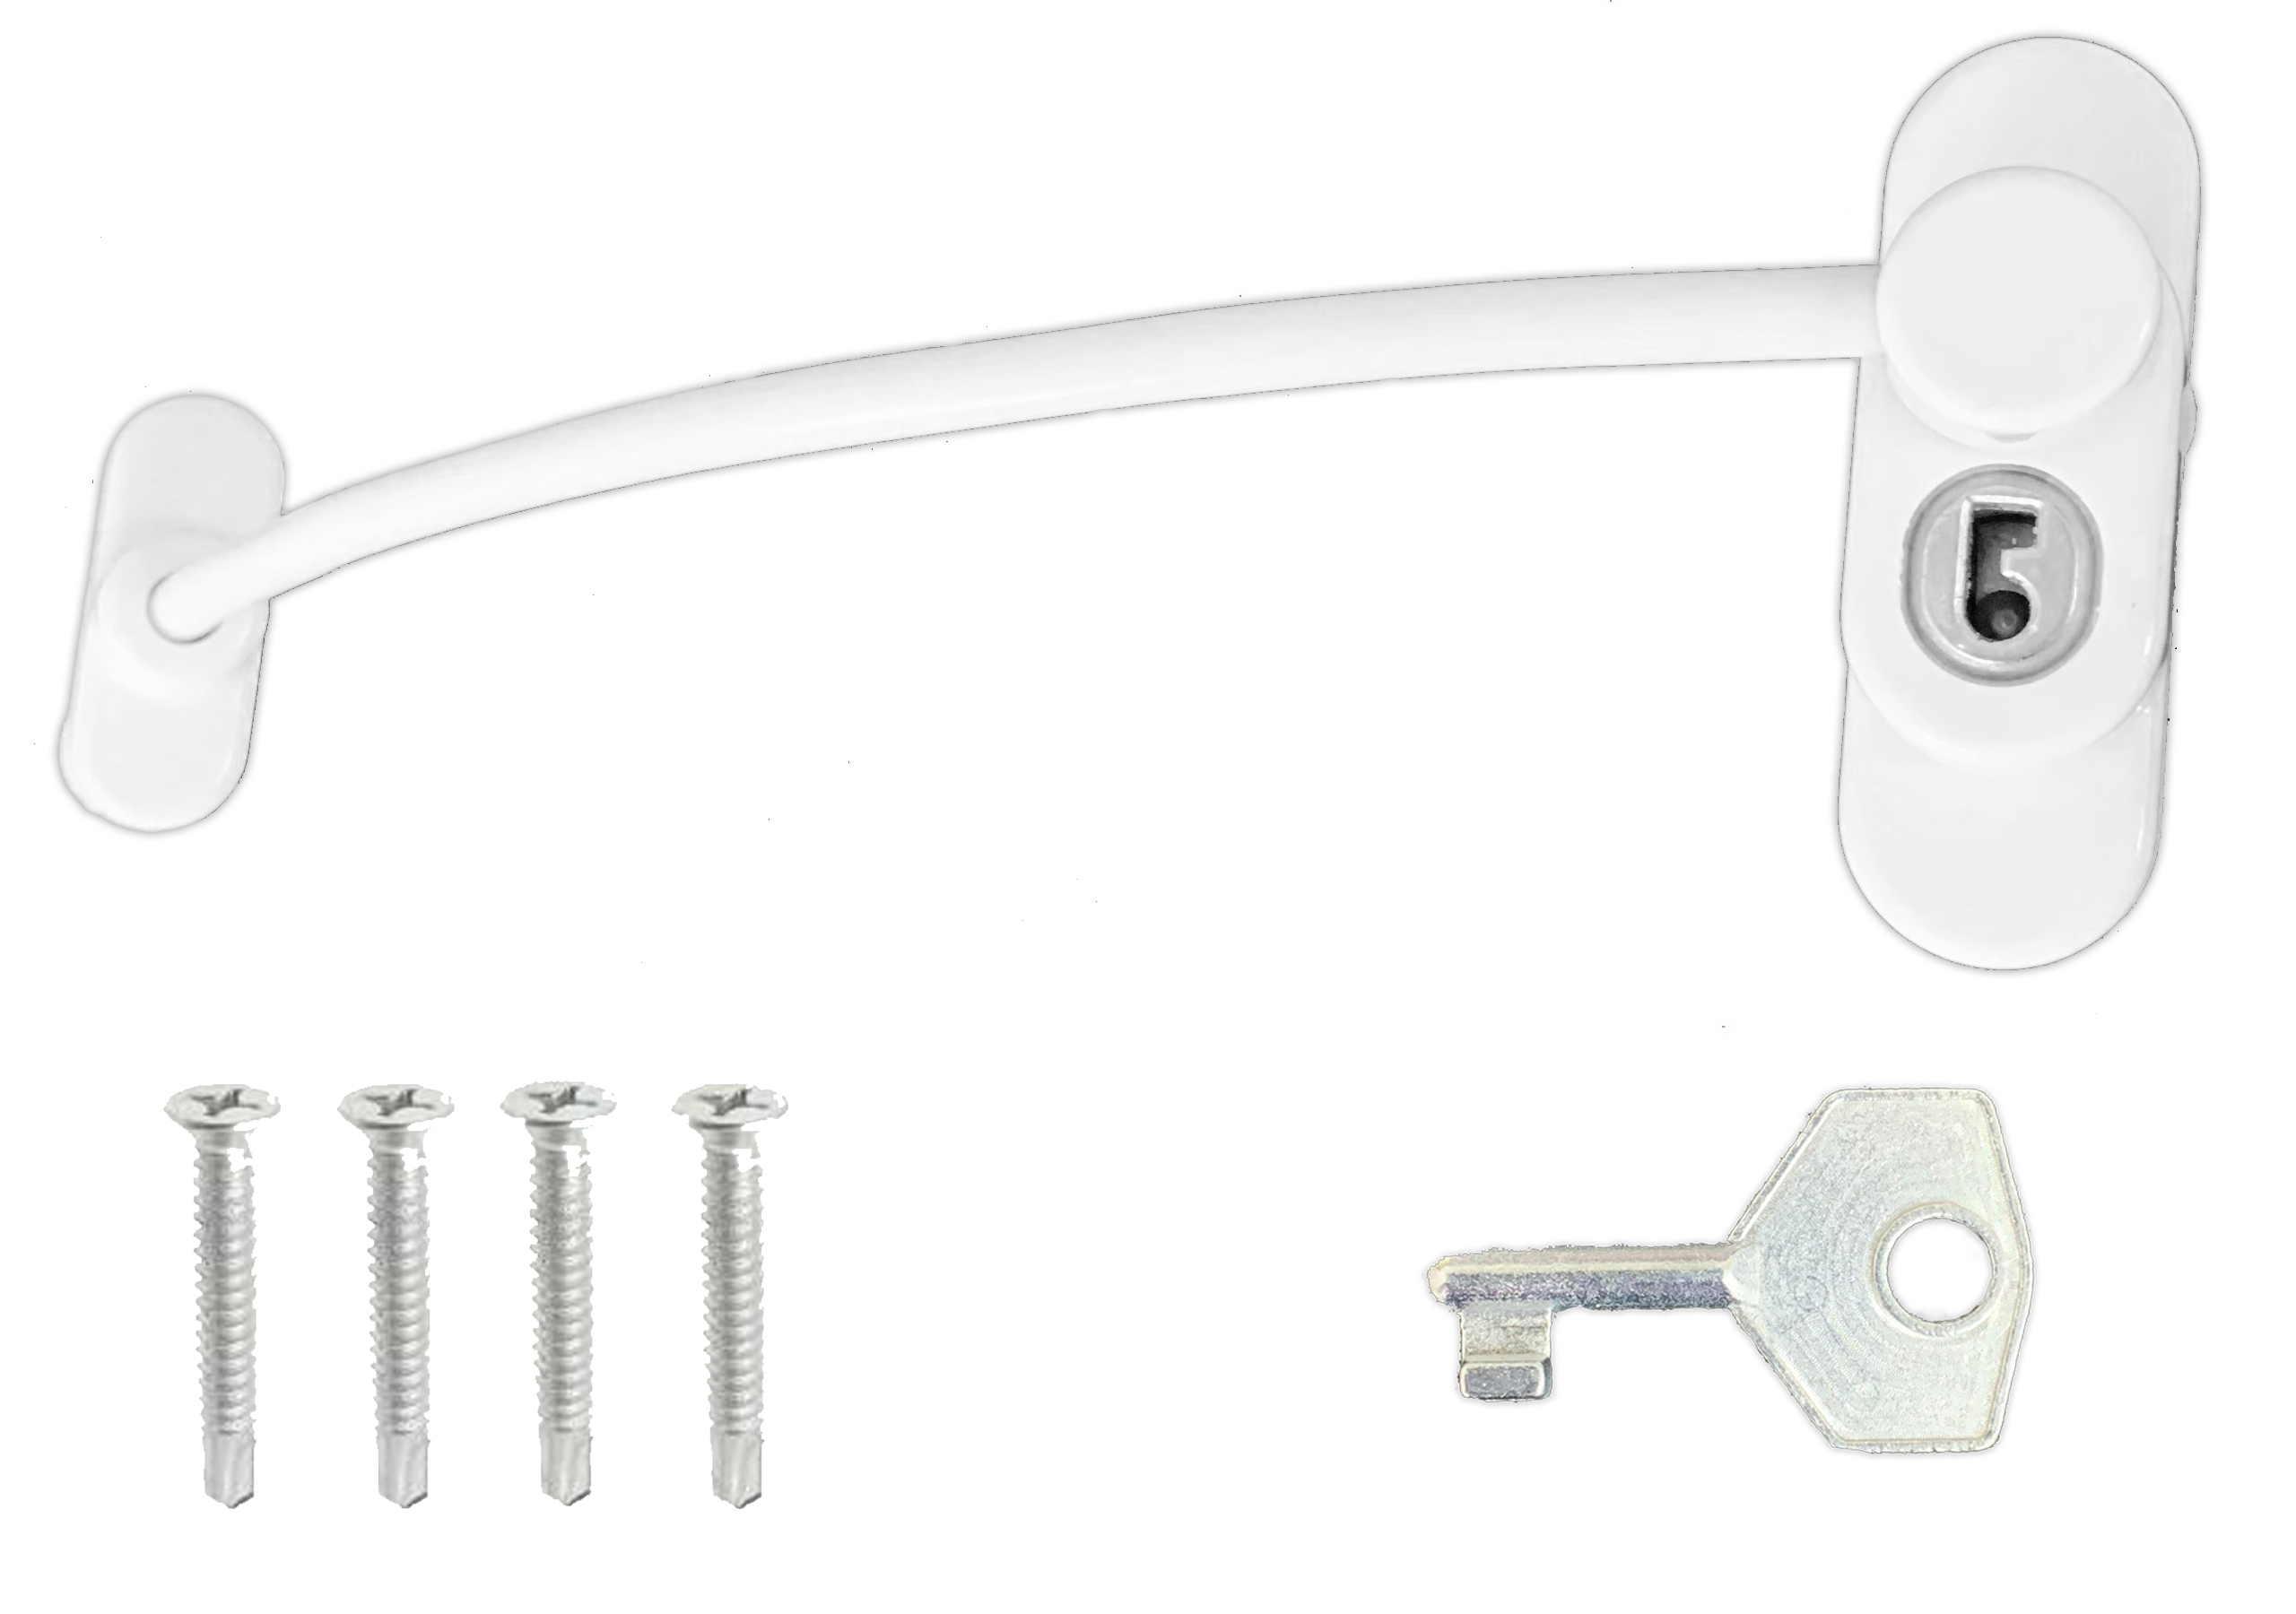 Details about   WHITE SAFETY WINDOW RESTRICTOR LOCK UPVC/Wooden Door Child Security Wire Cable 